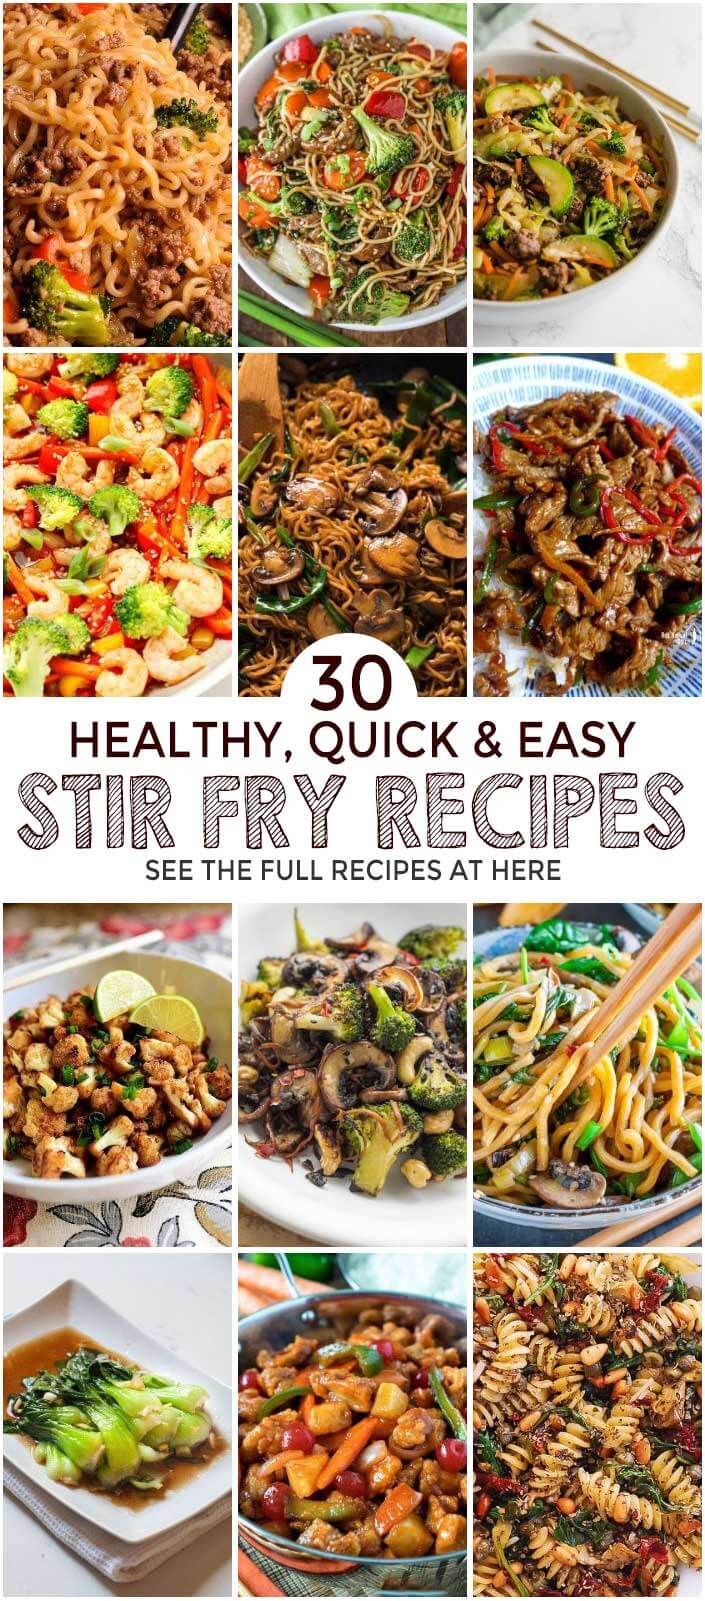 30 Of The Best Easy And Delicious Stir-Fry Recipes